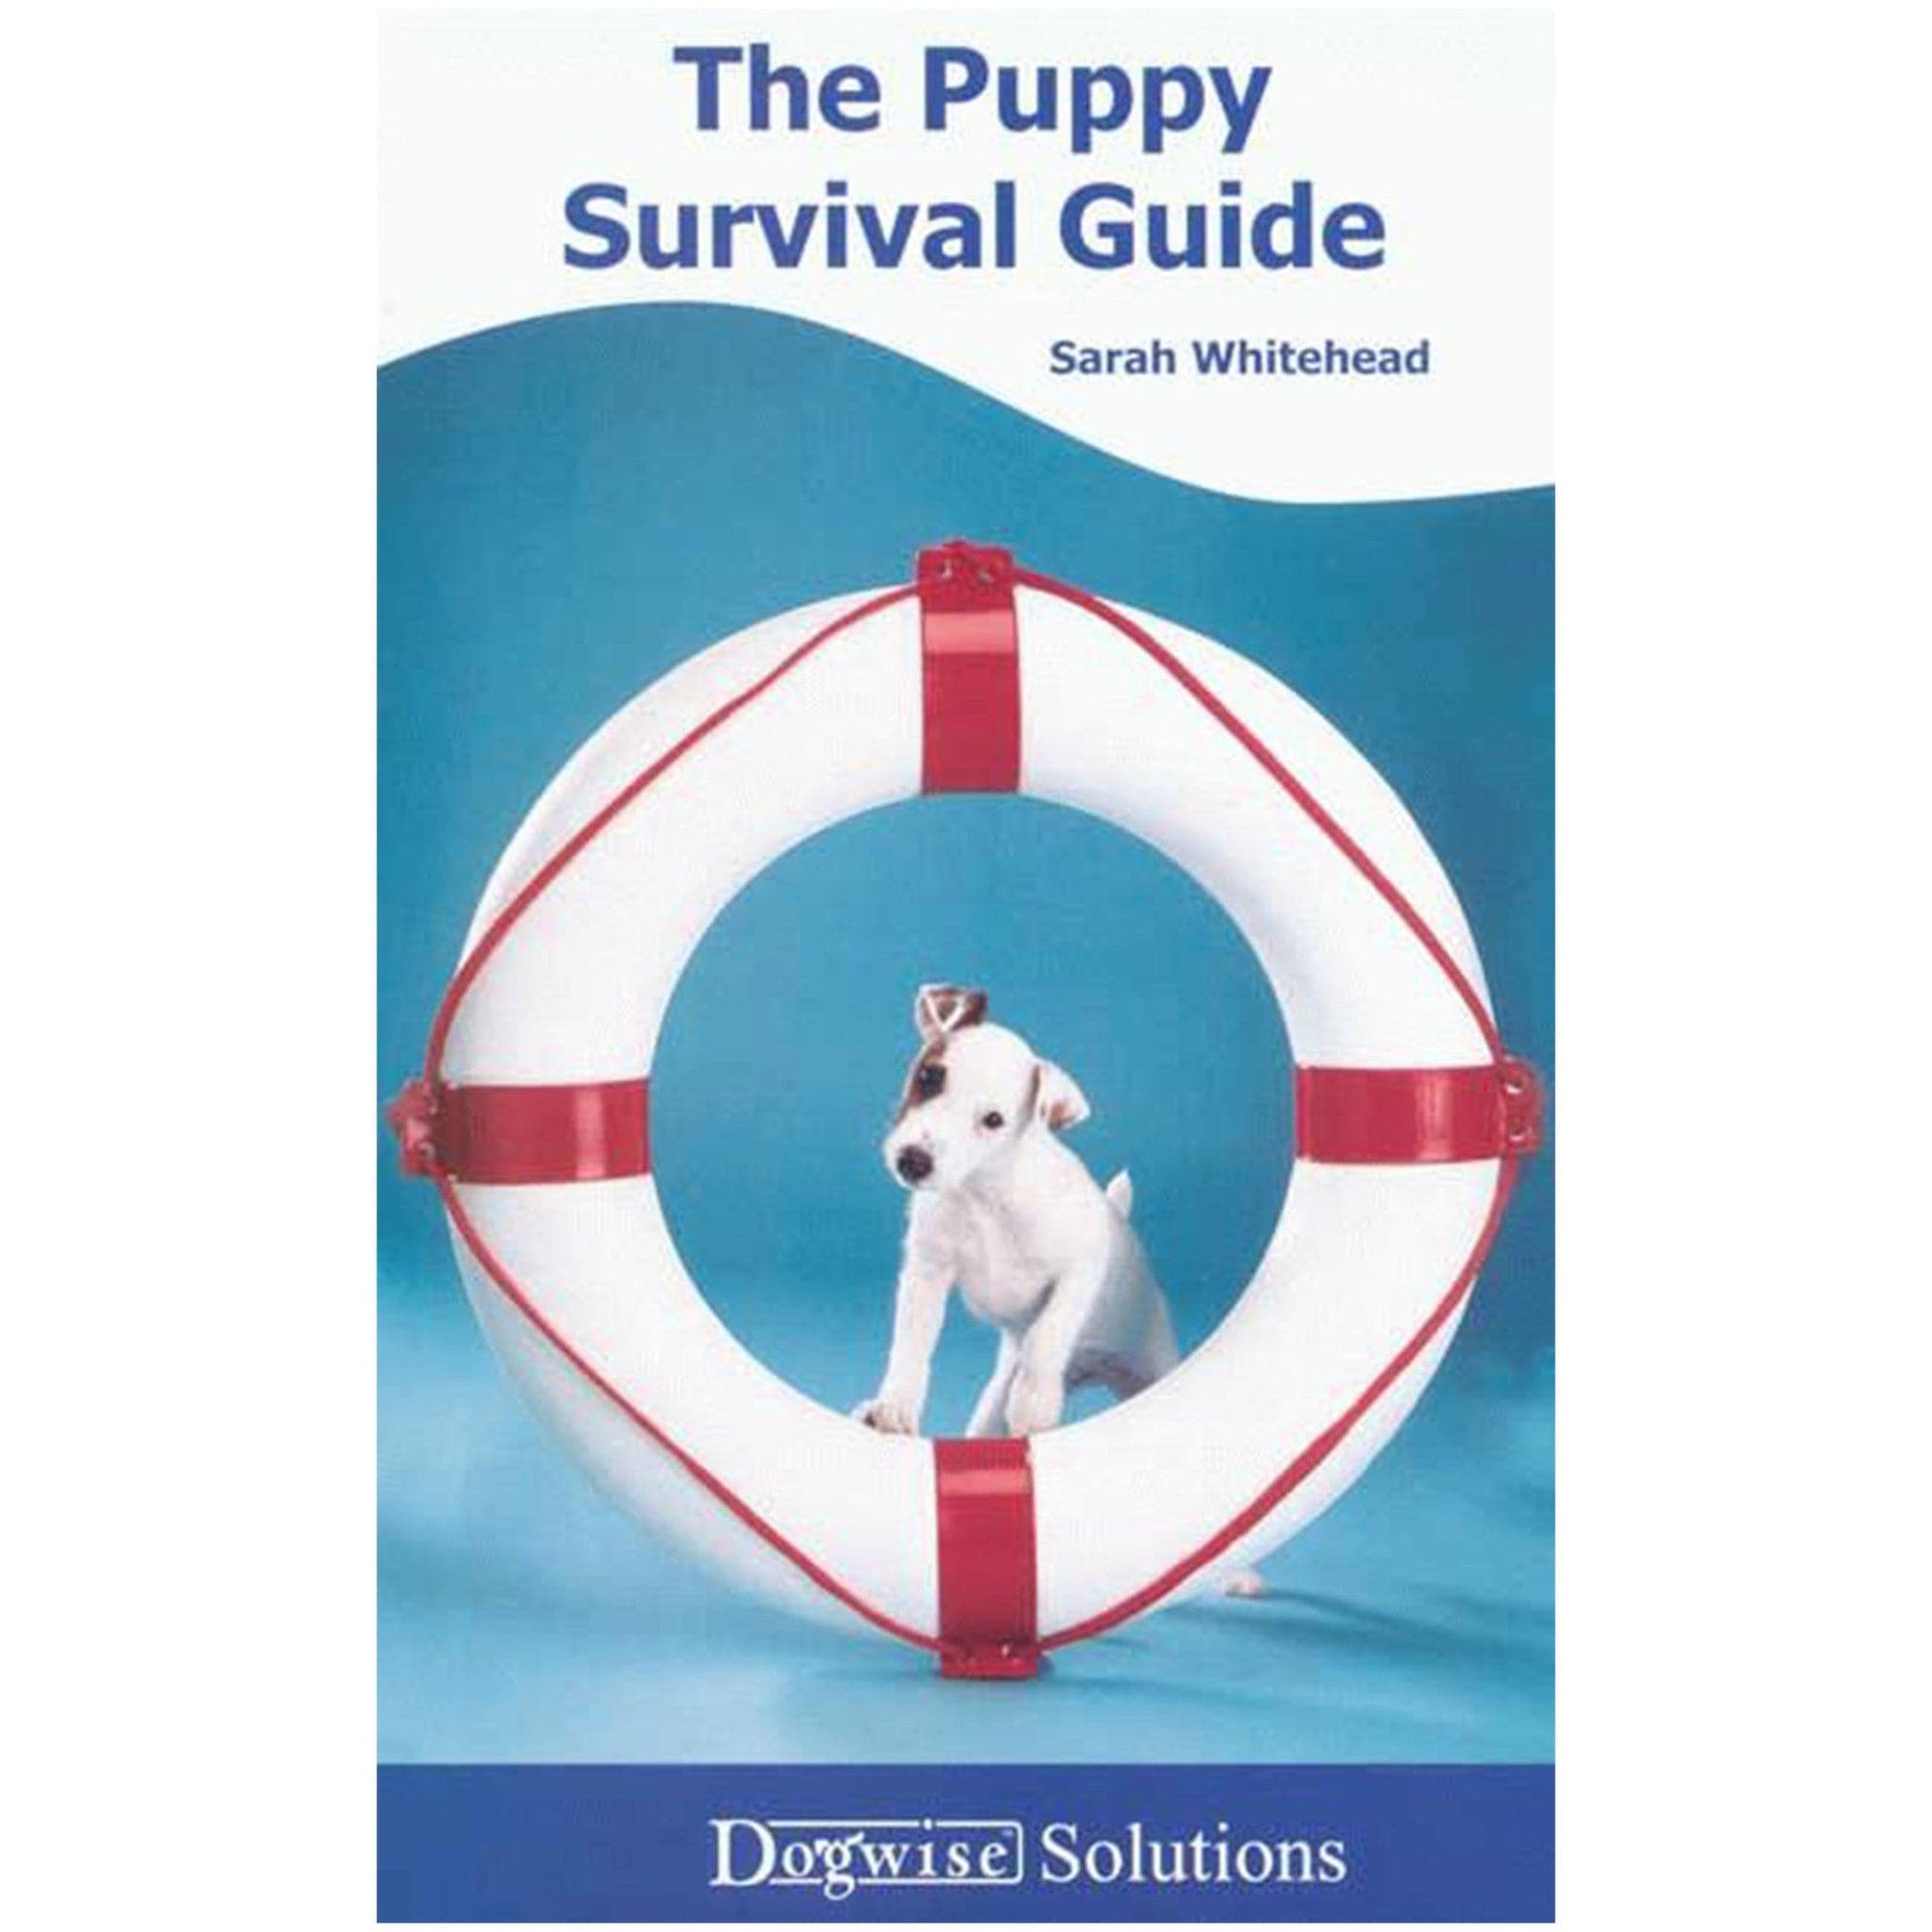 E-BOOK The Puppy Survival Guide by Sarah Whitehead